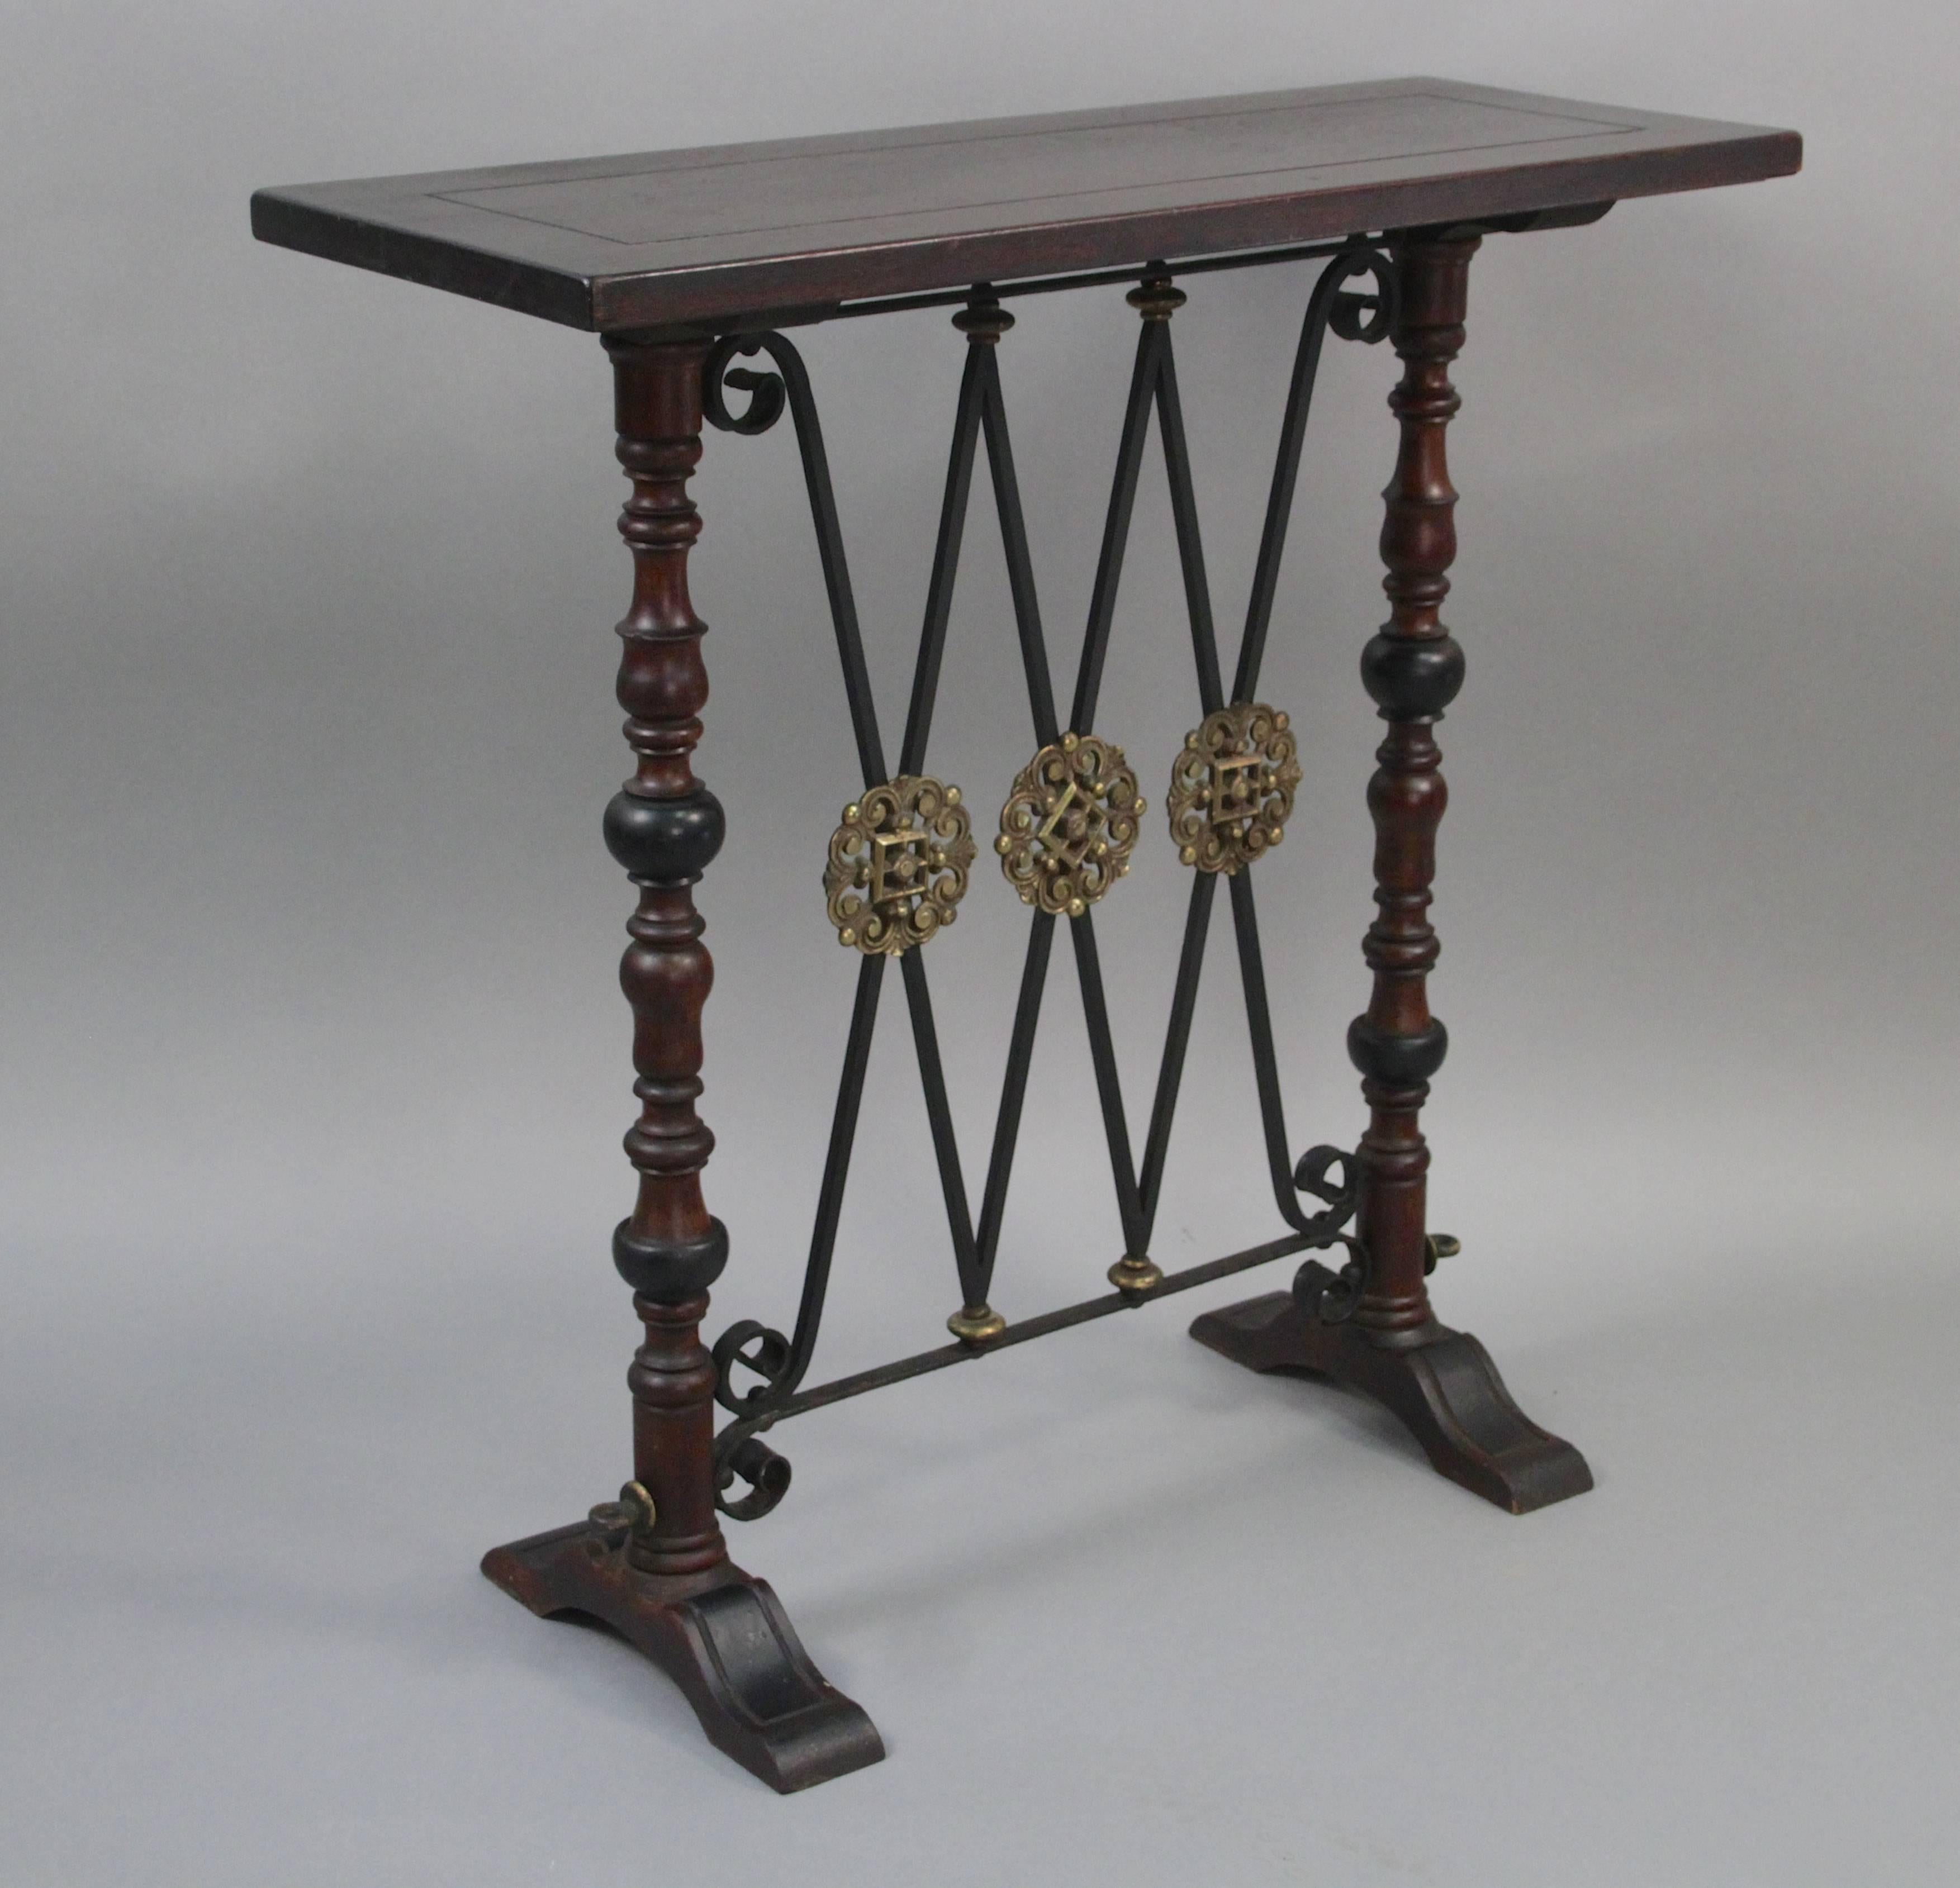 Hard to find shallow Spanish Revival console table with original finish and ironwork.